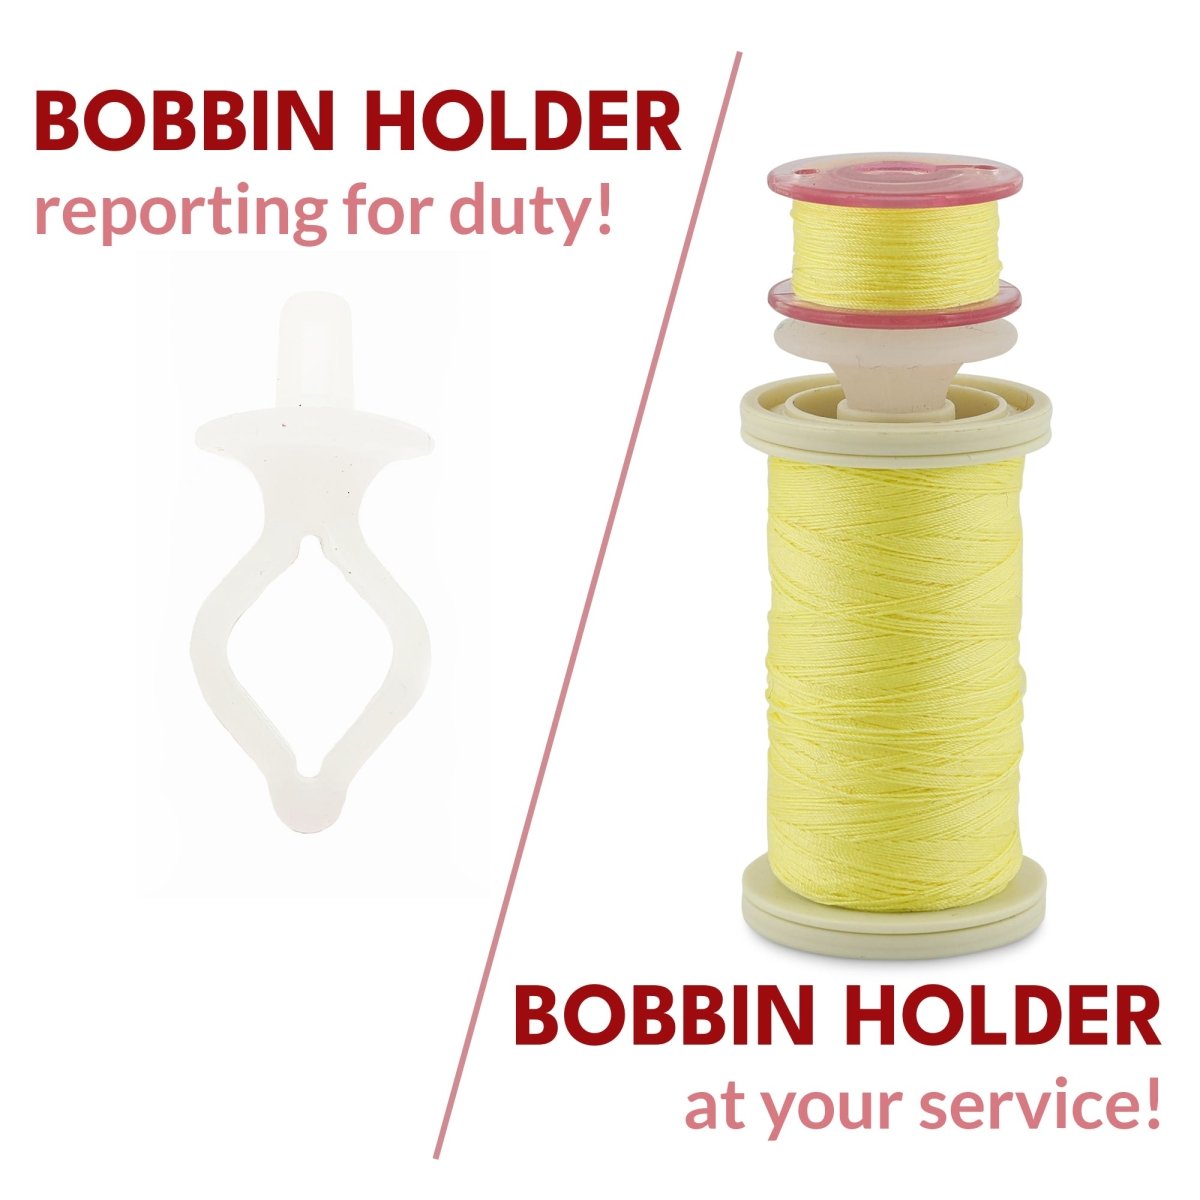 A white bobbin holder holding a bobbin with yellow thread on a spool with matching thread